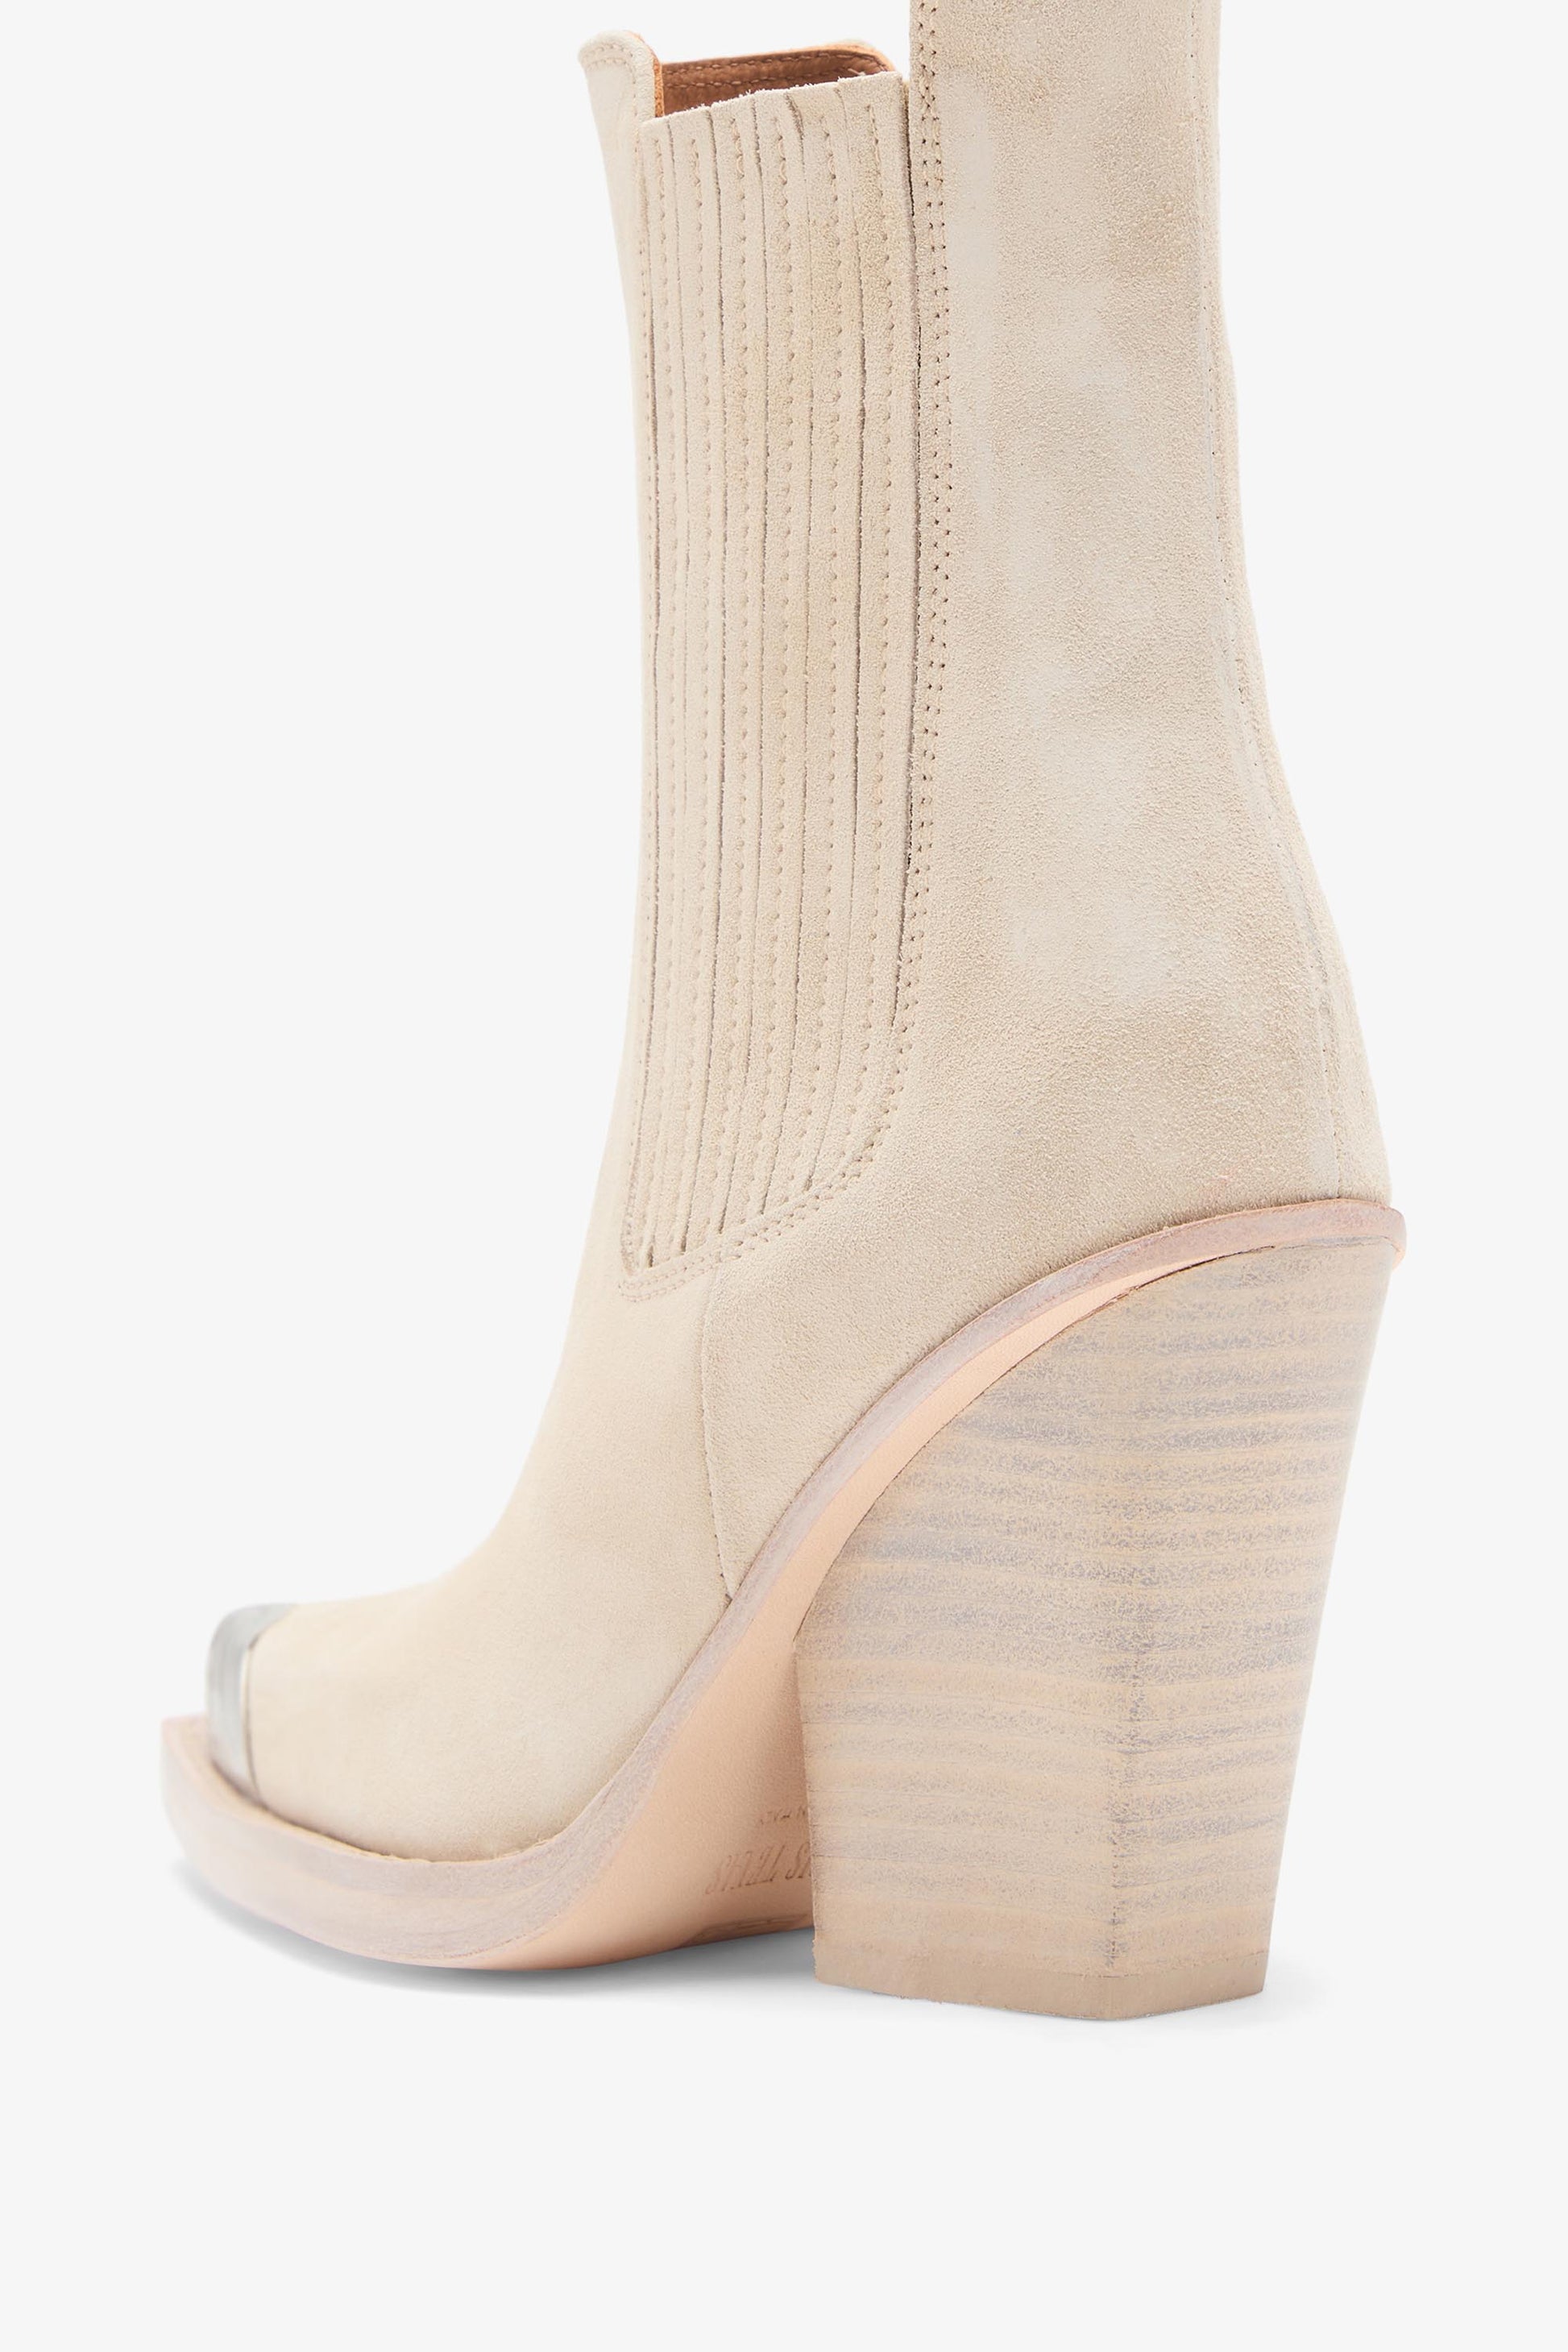 Off white calf suede ankle boots with metallic toe